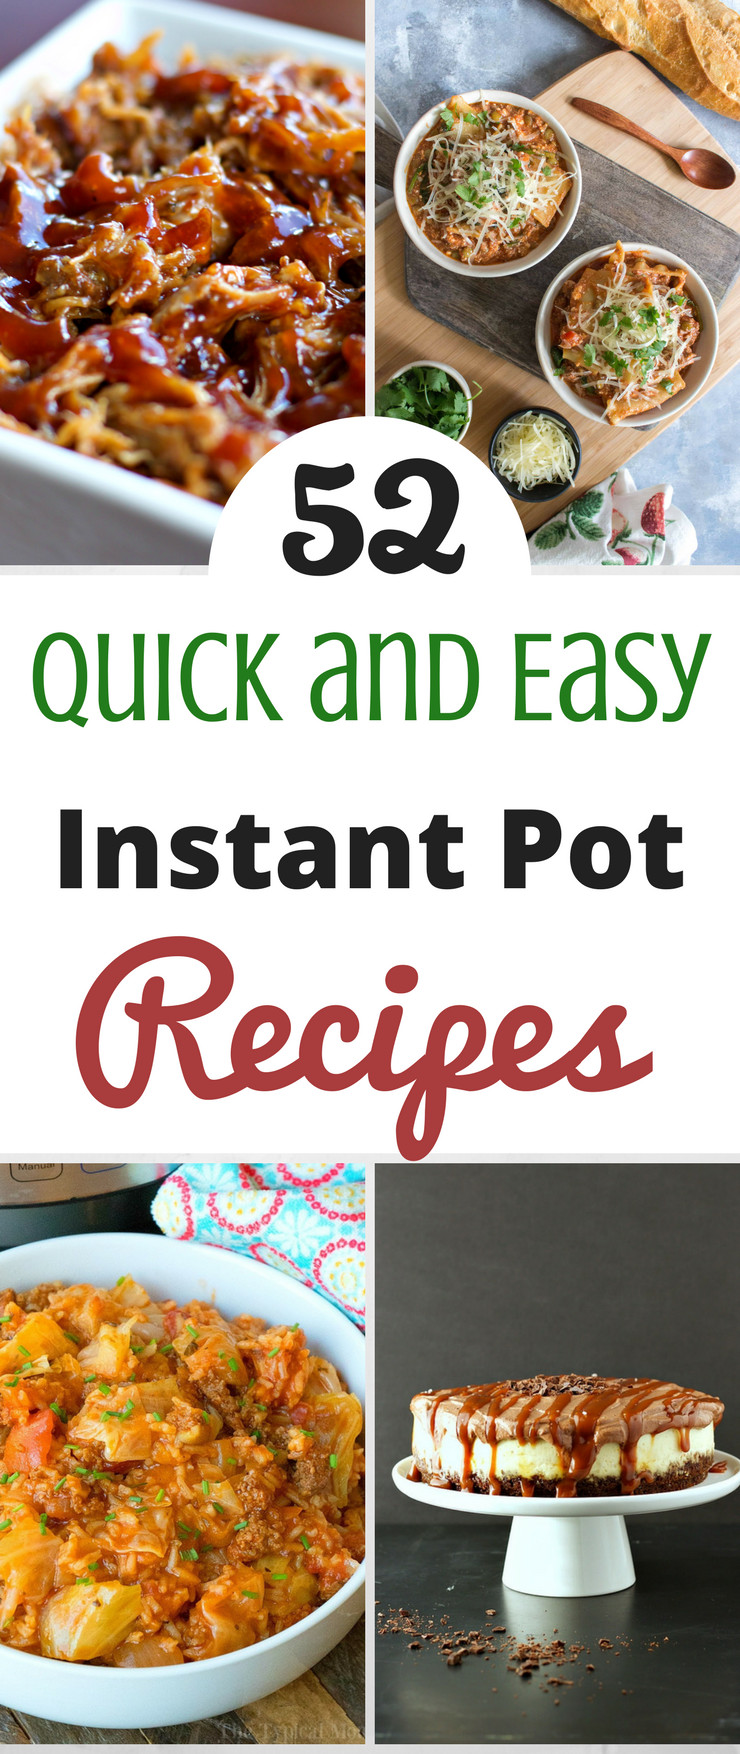 Quick And Easy Instant Pot Recipes
 52 Quick and Easy Instant Pot Recipes SlickHousewives